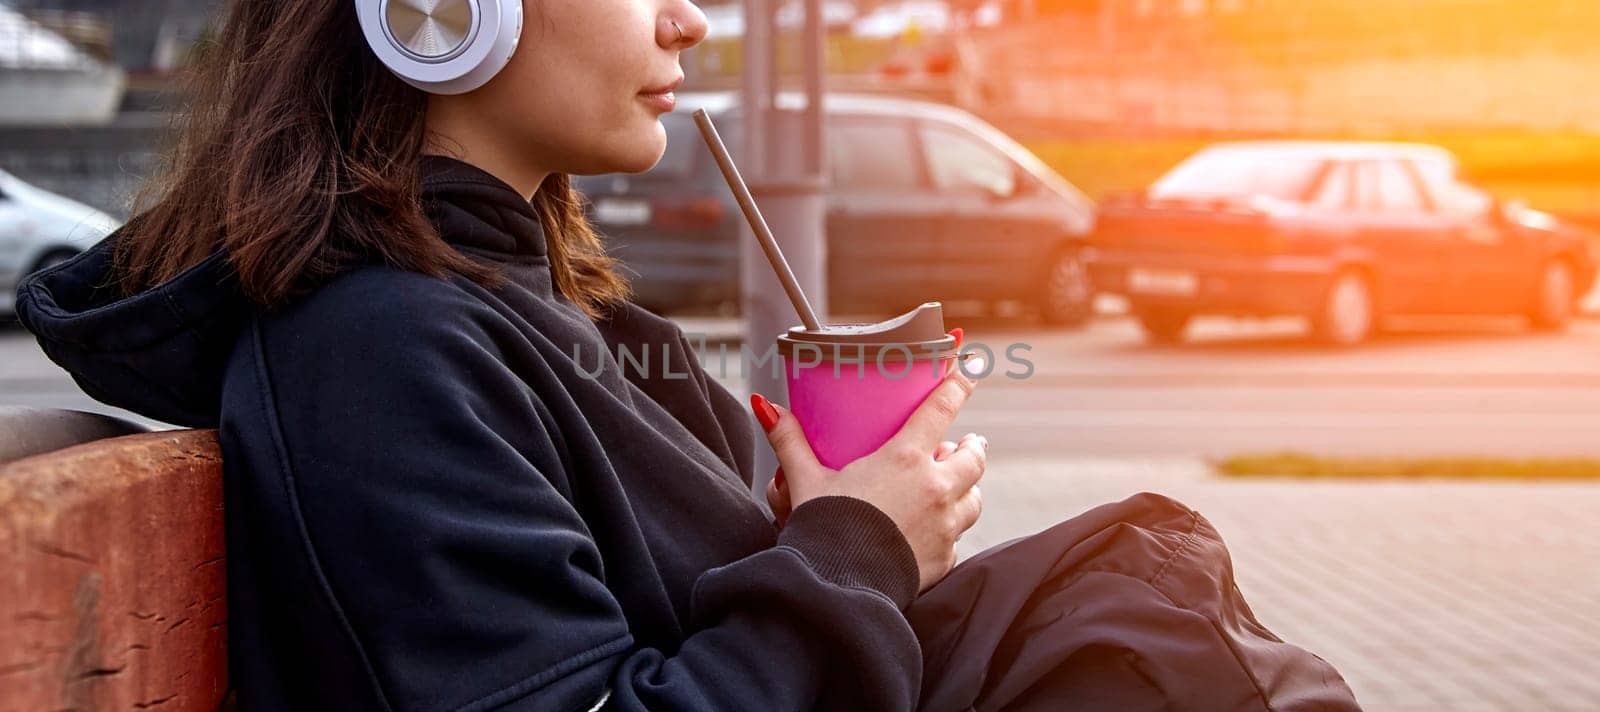 A young woman sits on a bench in an urban setting, enjoying a refreshing beverage on a warm afternoon. She wears headphones and seems engrossed in her own thoughts as she takes a break amidst the citys bustling energy. The sun shines brightly in the background, creating a warm and inviting atmosphere.